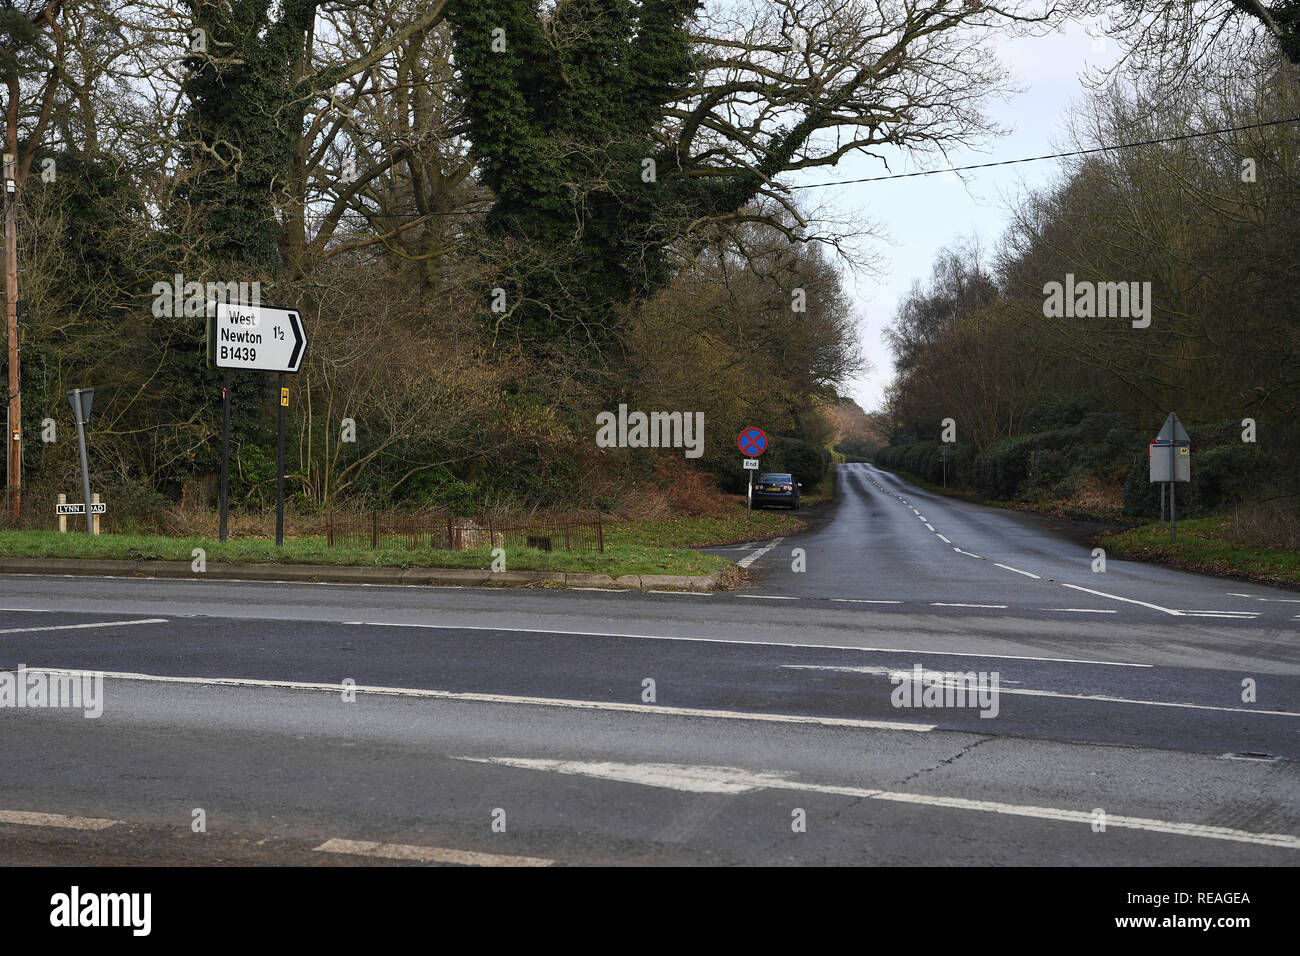 Norfolk, UK. 20th January, 2019. The A149 junction with the B1439 West Newton road in North Norfolk, where Prince Philip, The Duke of Edinburgh, crashed his Landrover Freelander into another car on Thursday 17th January 2019. Picture by Andrew Parsons / Parsons Media Credit: andrew parsons/Alamy Live News Stock Photo